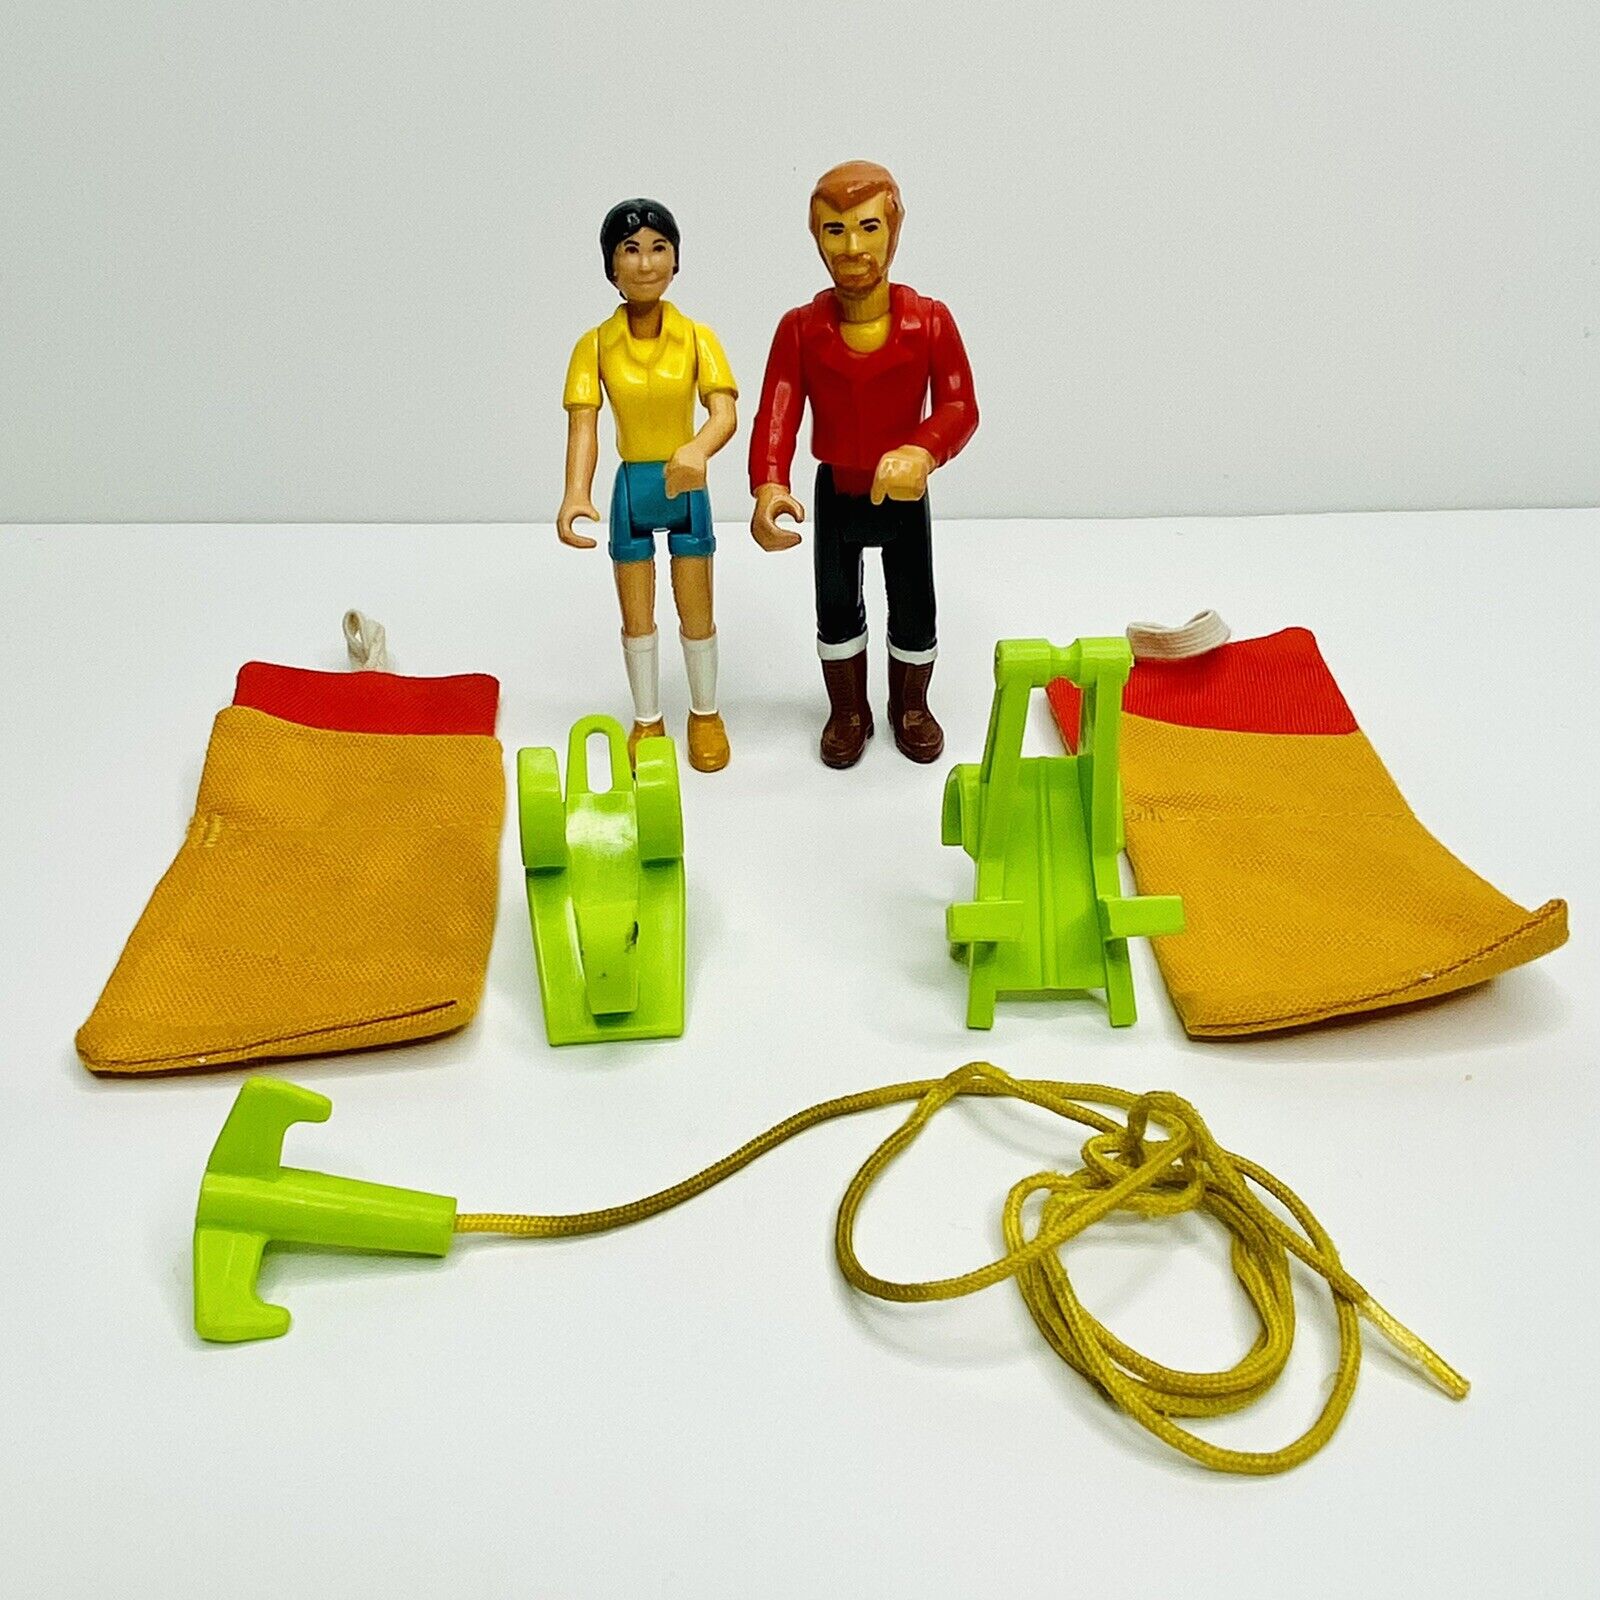 Fisher-Price Vintage 1976 Adventure People Mountain Climbers #351- Complete Fisher-Price